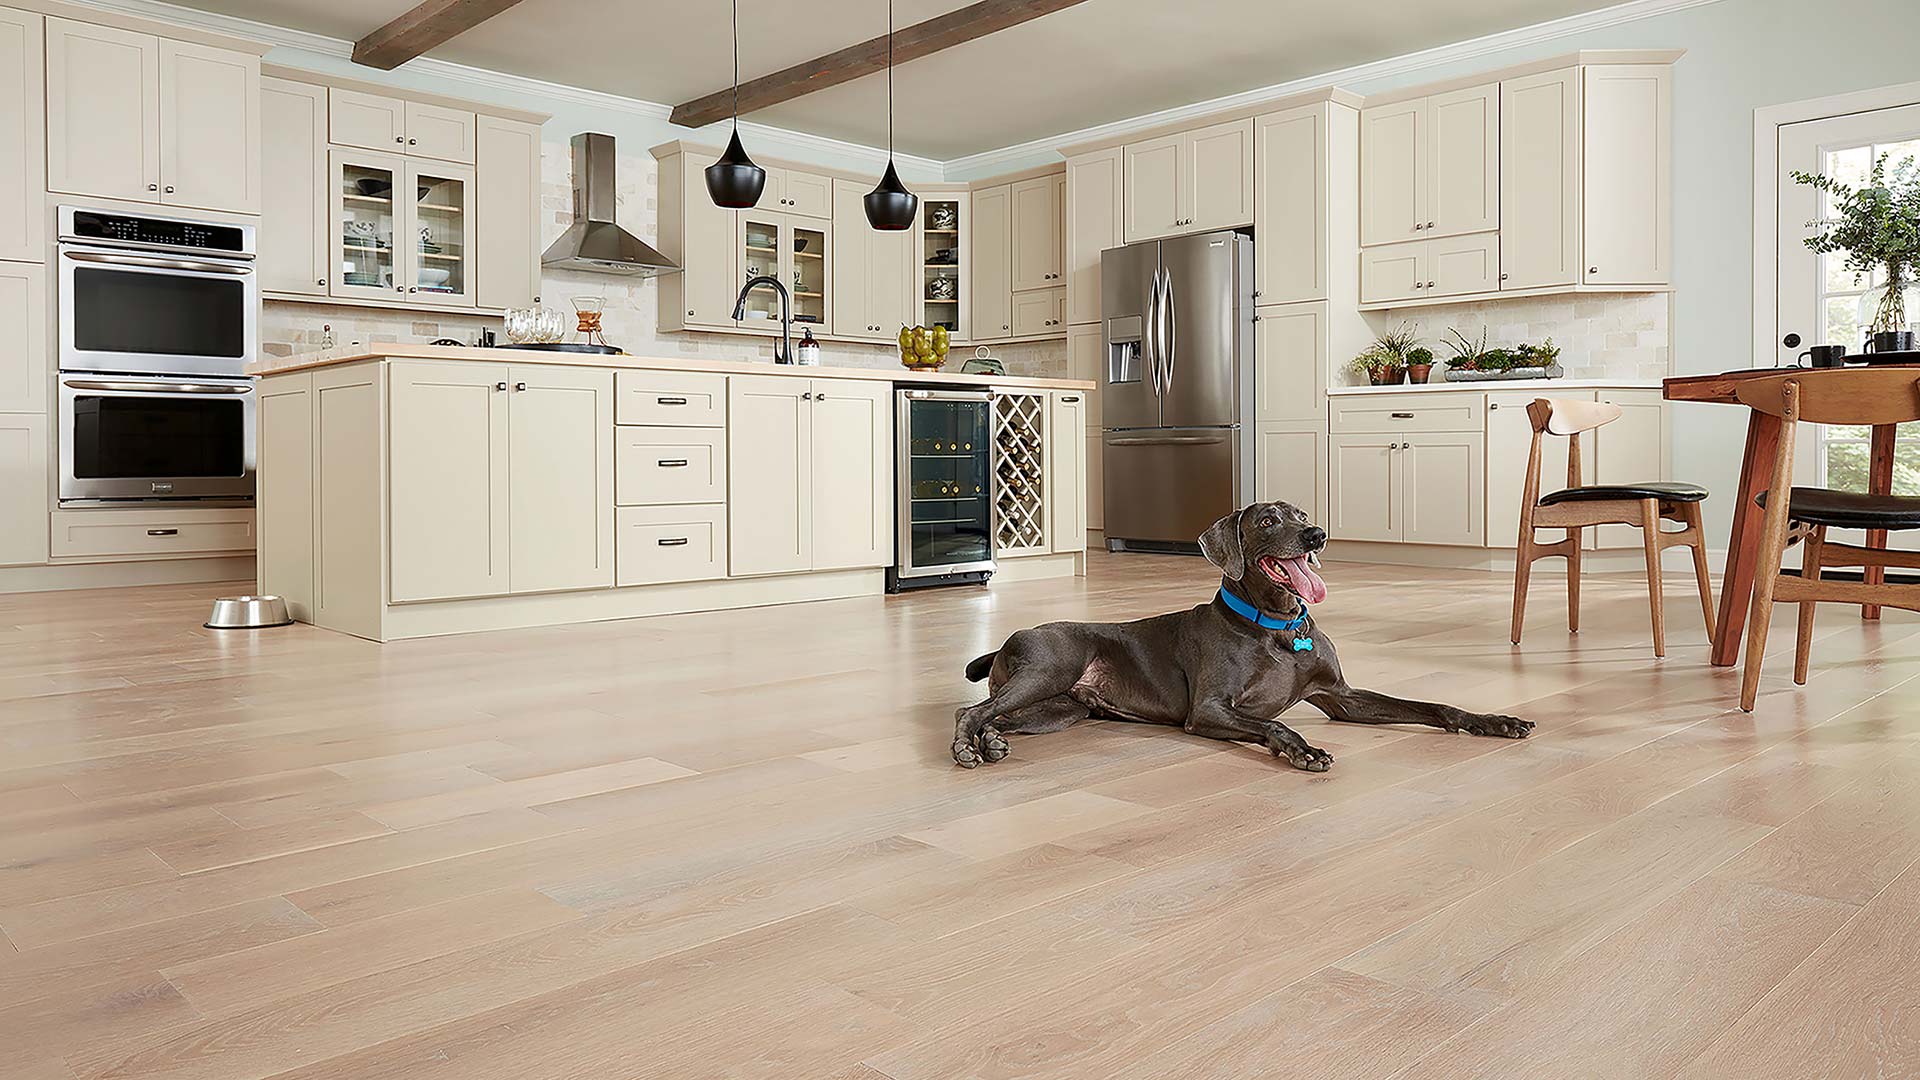 Dog lying down, resting on a beautiful kitchen wood floor